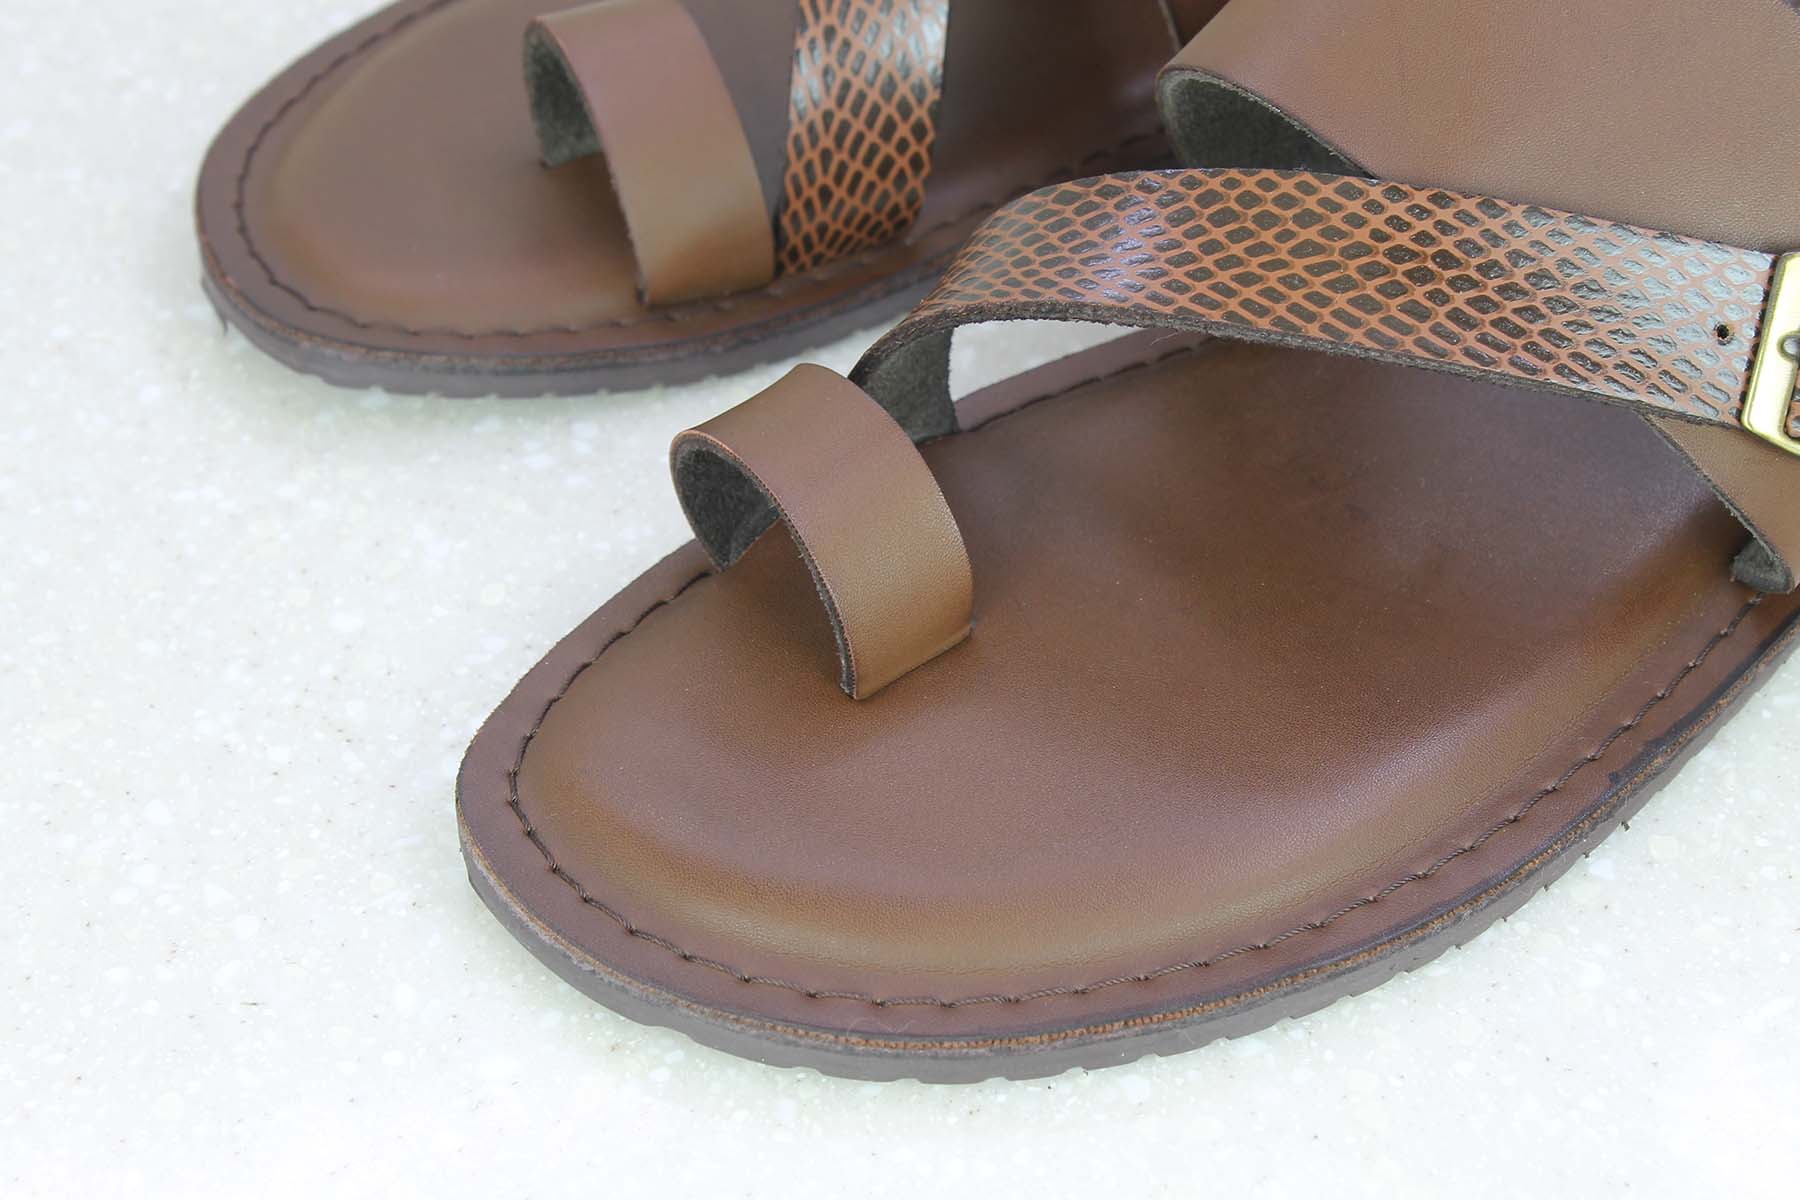 FRONT BUCKLE THONG -BROWN-Men's Slippers-Inc5 Shoes